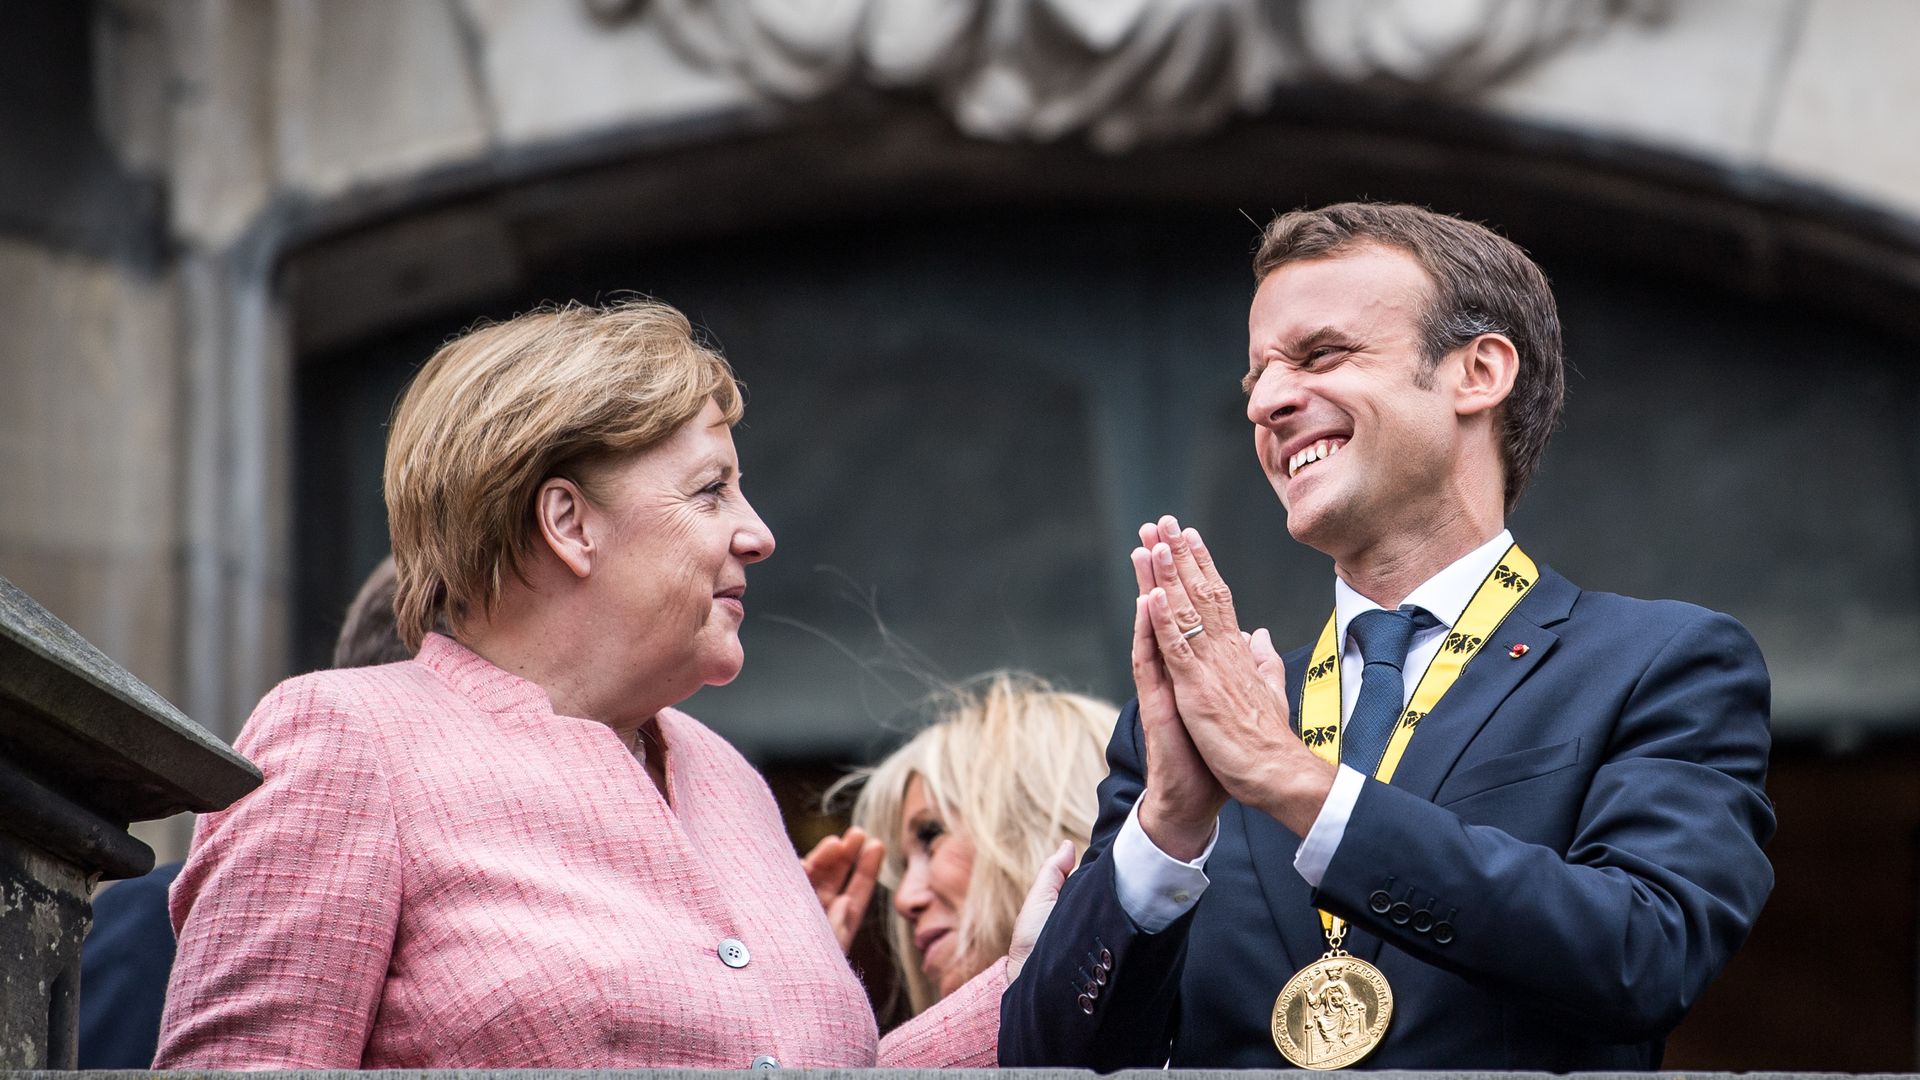 German Chancellor Angela Merkel and French President Emmanuel Macron gesture on the balcony of the town hall of Aachen